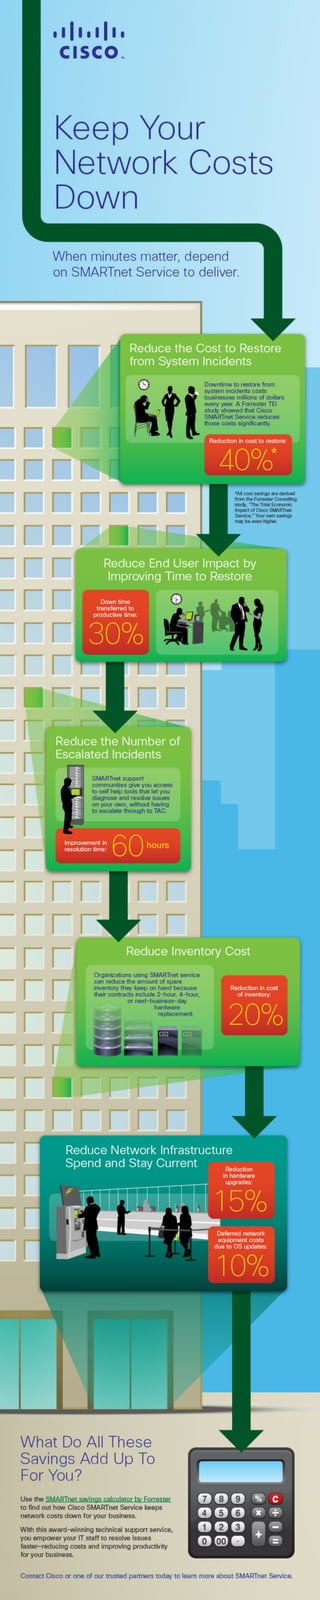 Infographic: Keep Your Network Costs Down